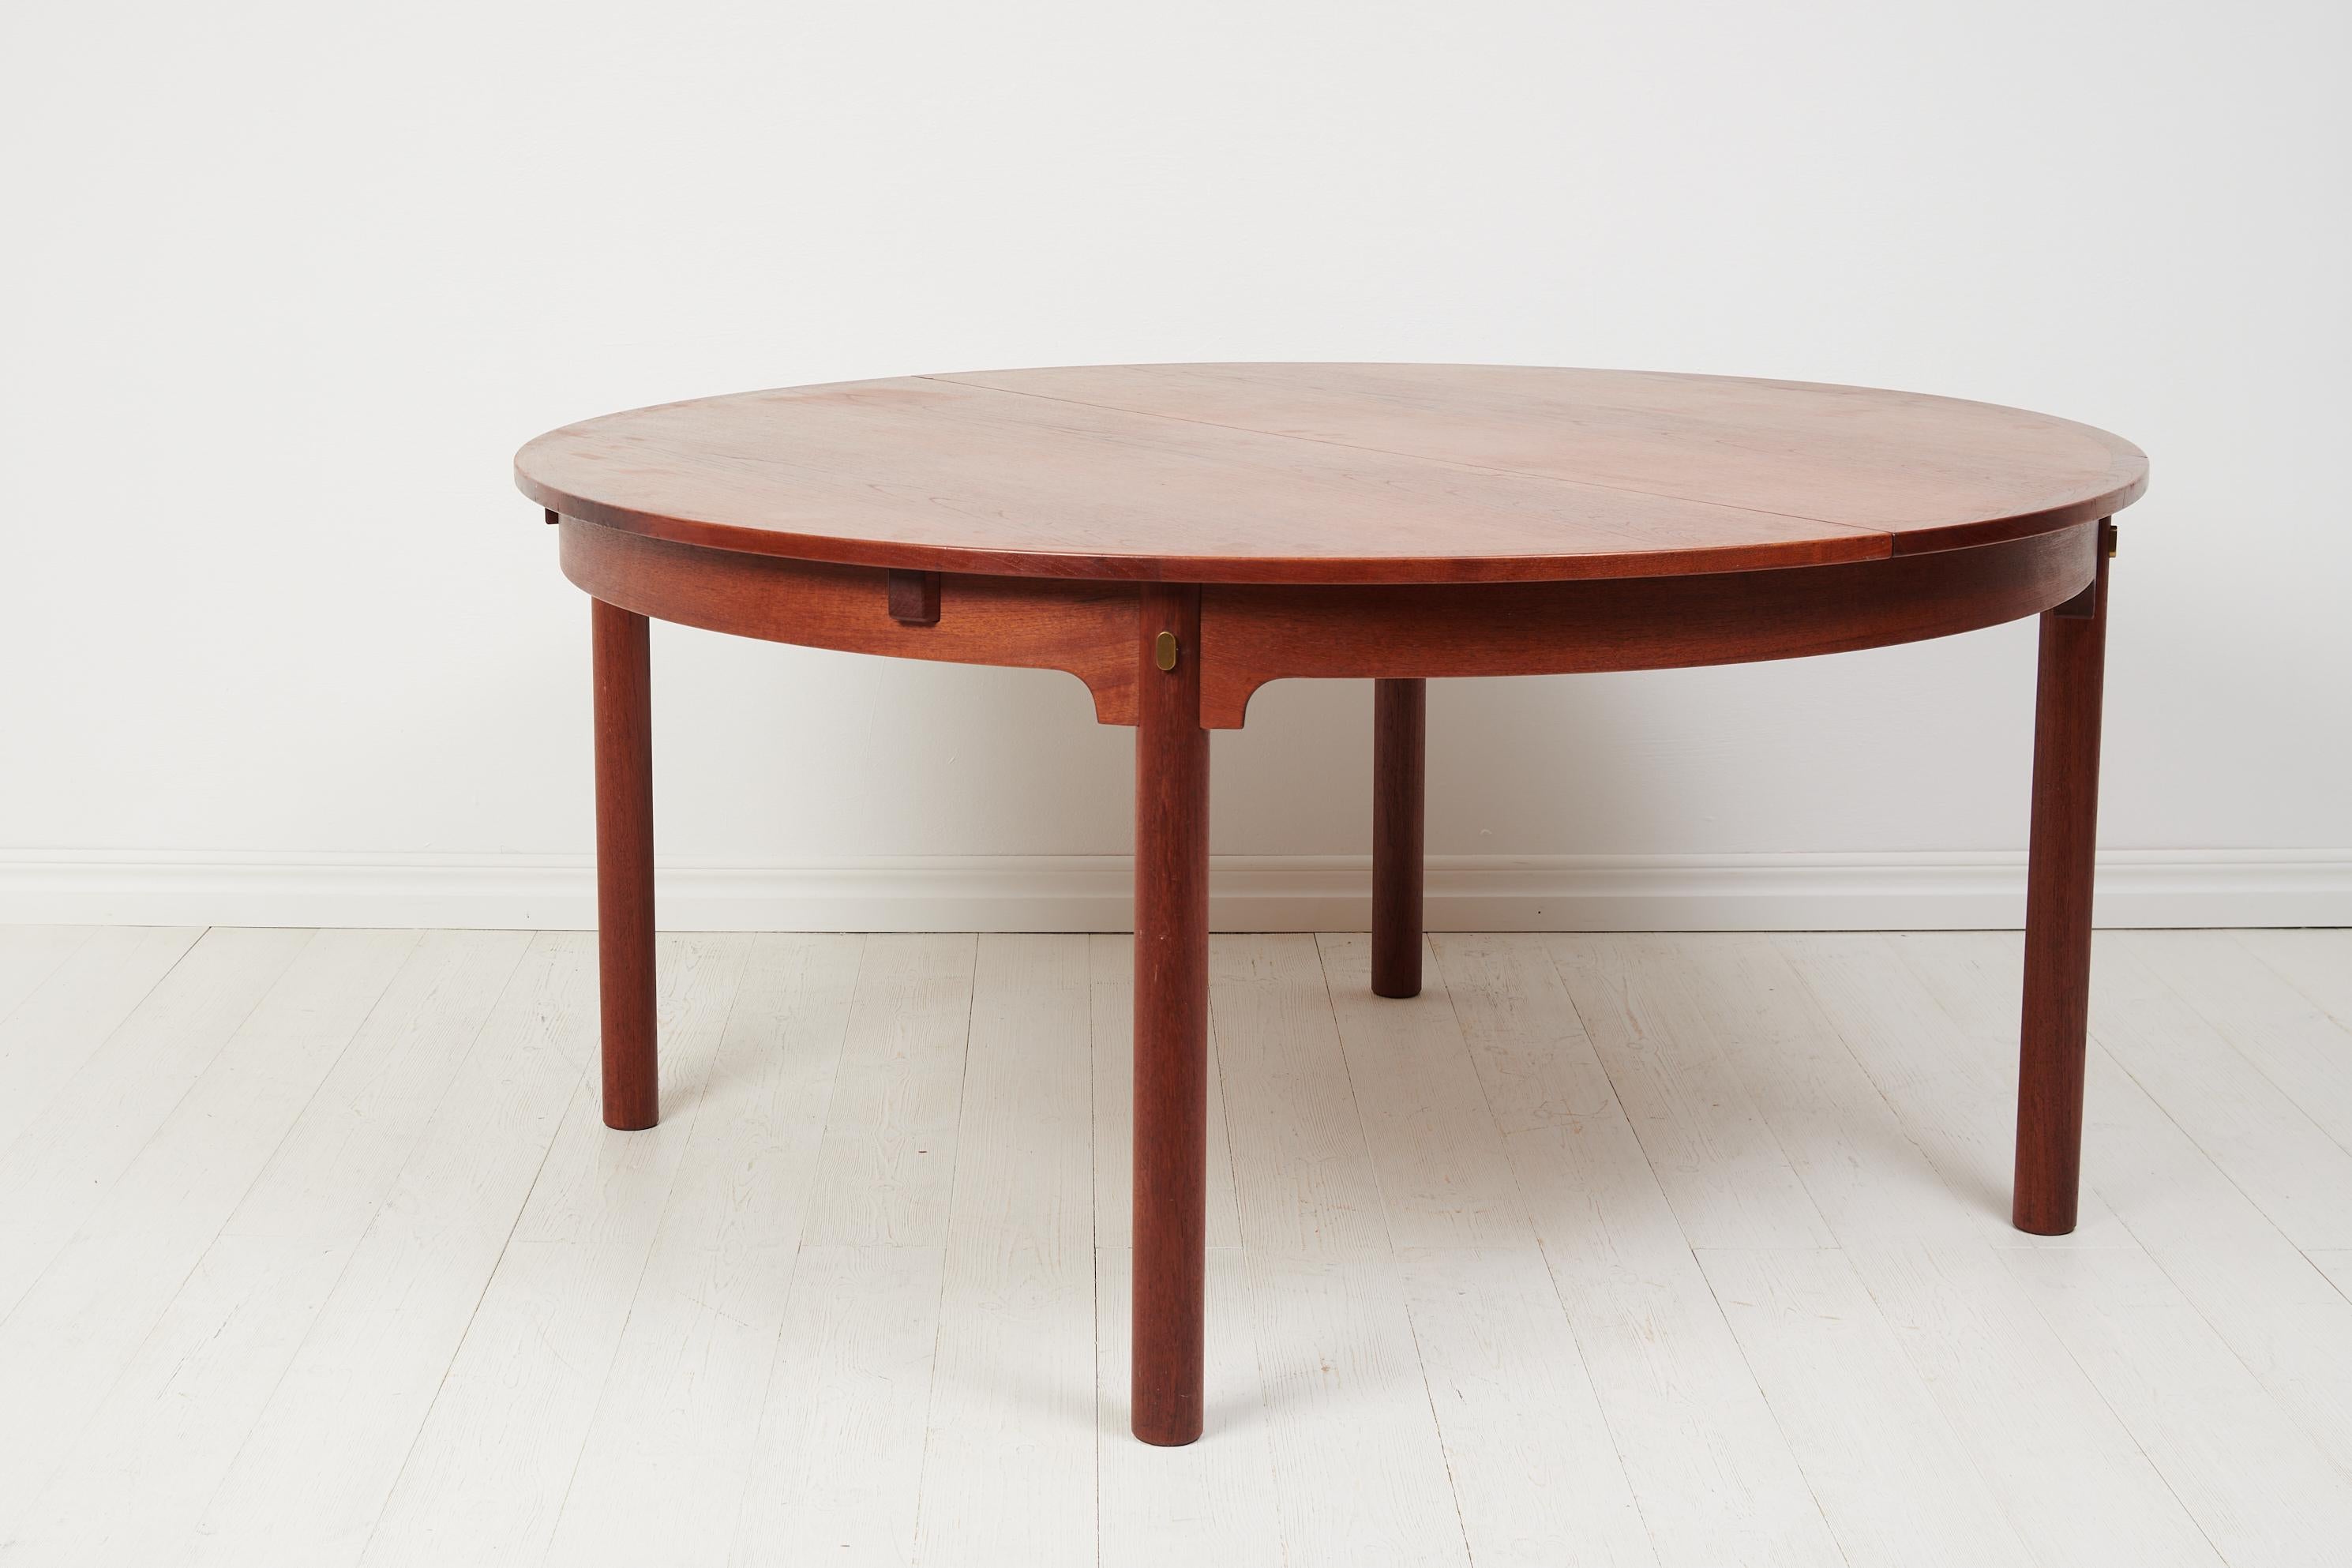 Börge Mogensen dining table ”Øresund” by Karl Andersson & Söner in Sweden. The table Öresund or Øresund is a large round dining table with sleek proportions and a timeless expression. Øresund has been made by Karl Andersson & Söner since 1955 and